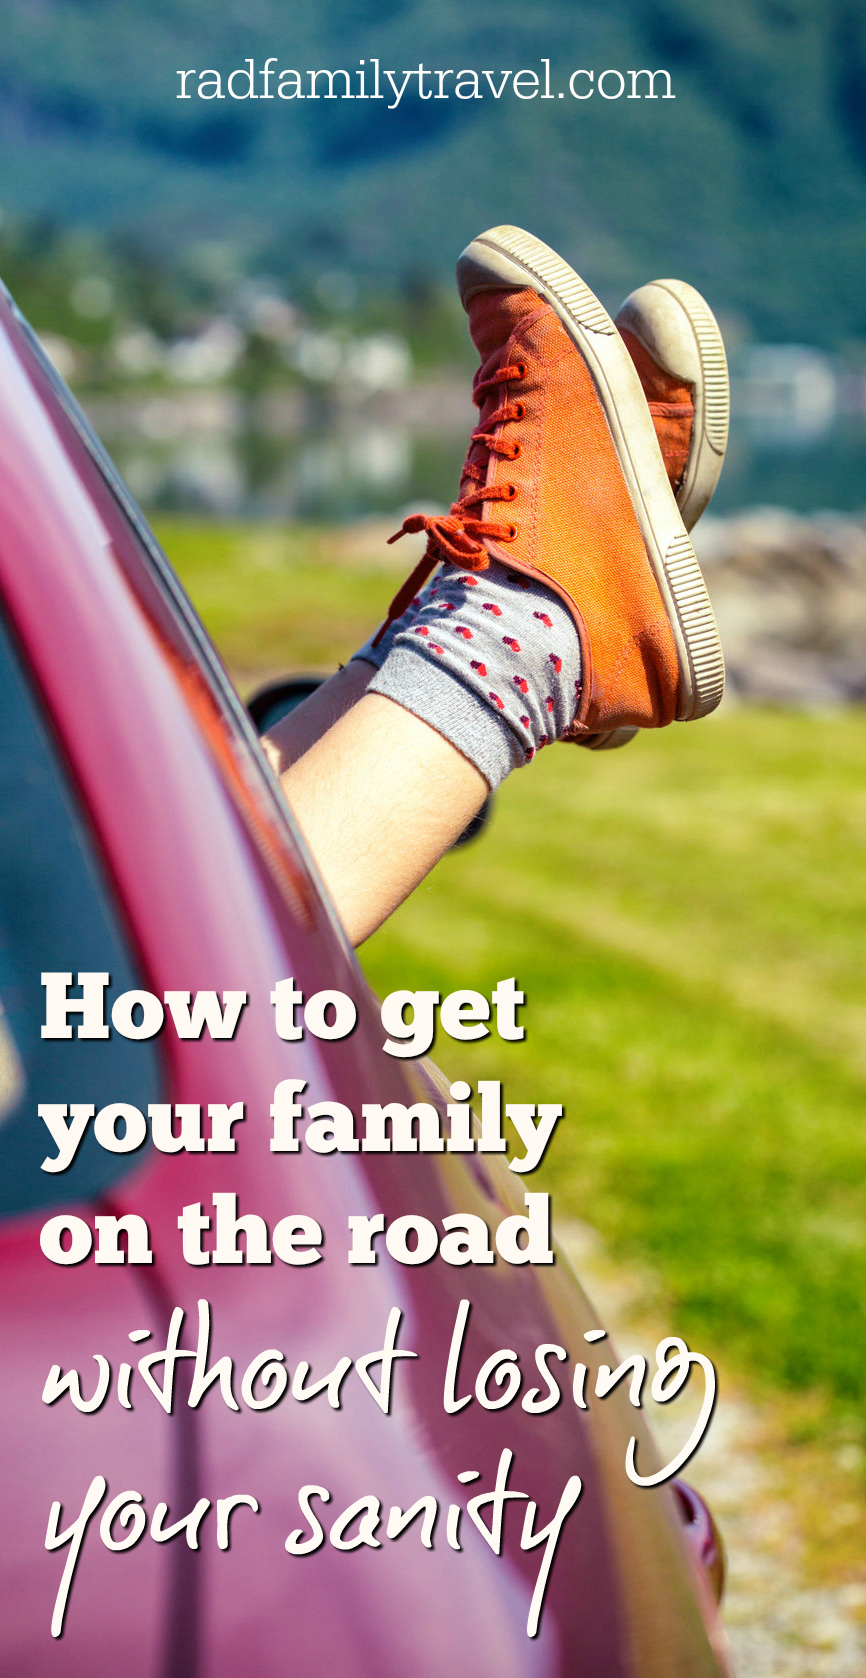 Tips for successfully taking off on the road with kids - Rad Family Travel